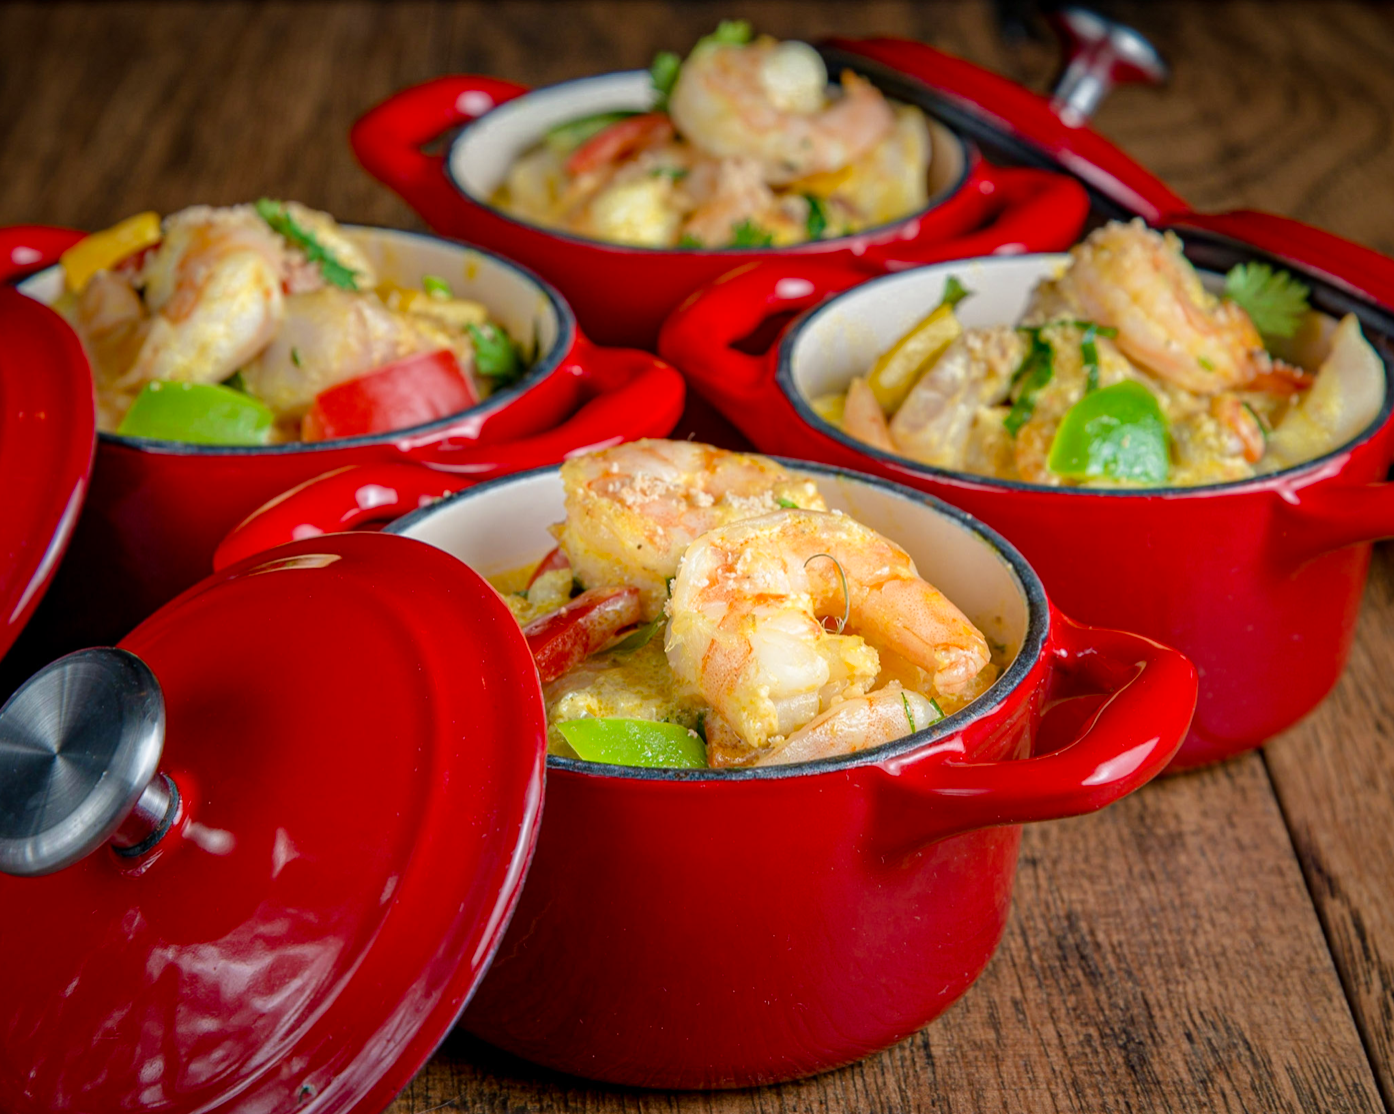 Try Our Brazilian Signature Dish – Shrimp and Fish Stew